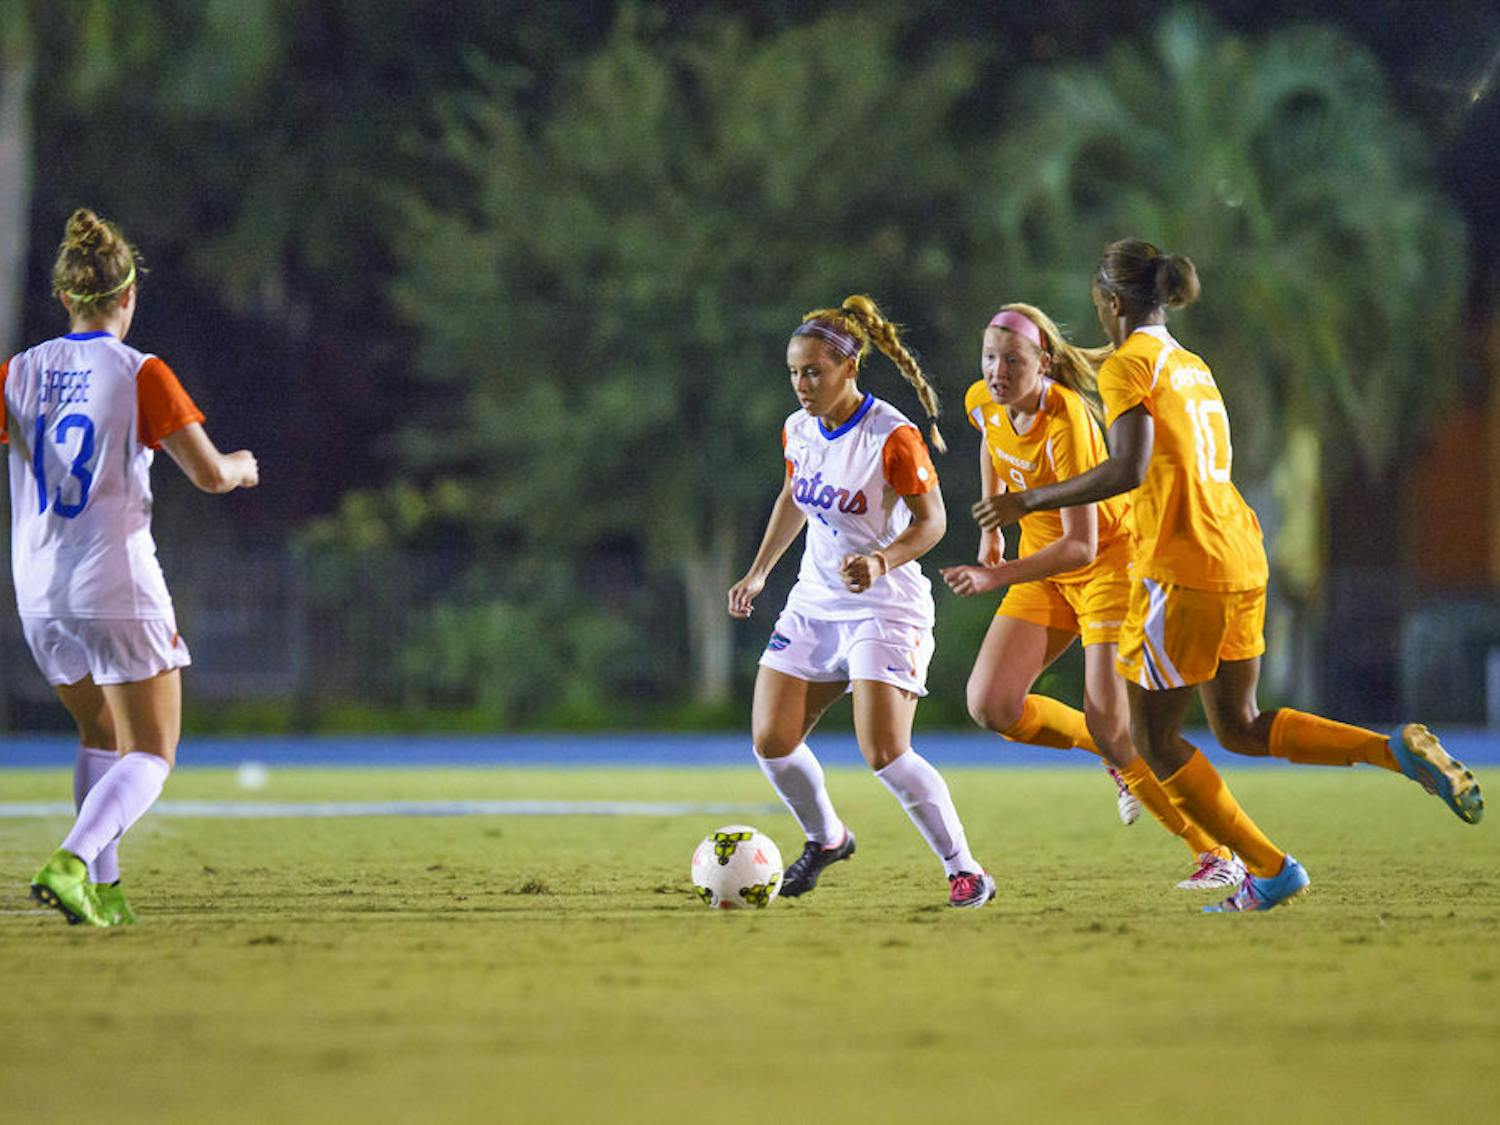 Lauren Silver dribbles the ball during Florida's 3-1 win against Tennessee.